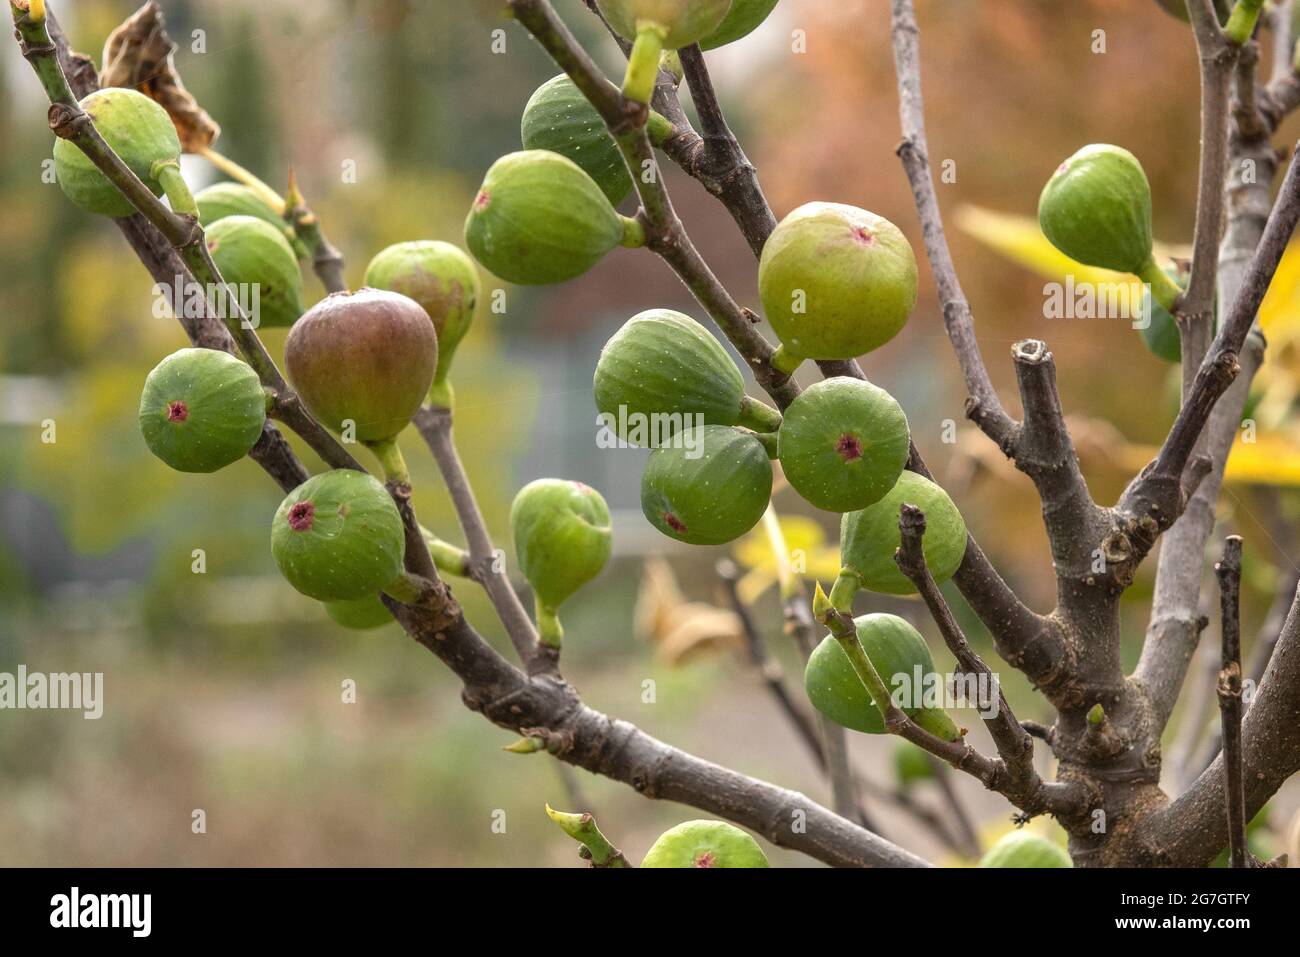 Edible fig, Common fig, Figtree (Ficus carica 'Brown Turkey', Ficus carica Brown Turkey), figs on a tree, cultivar Brown Turkey Stock Photo